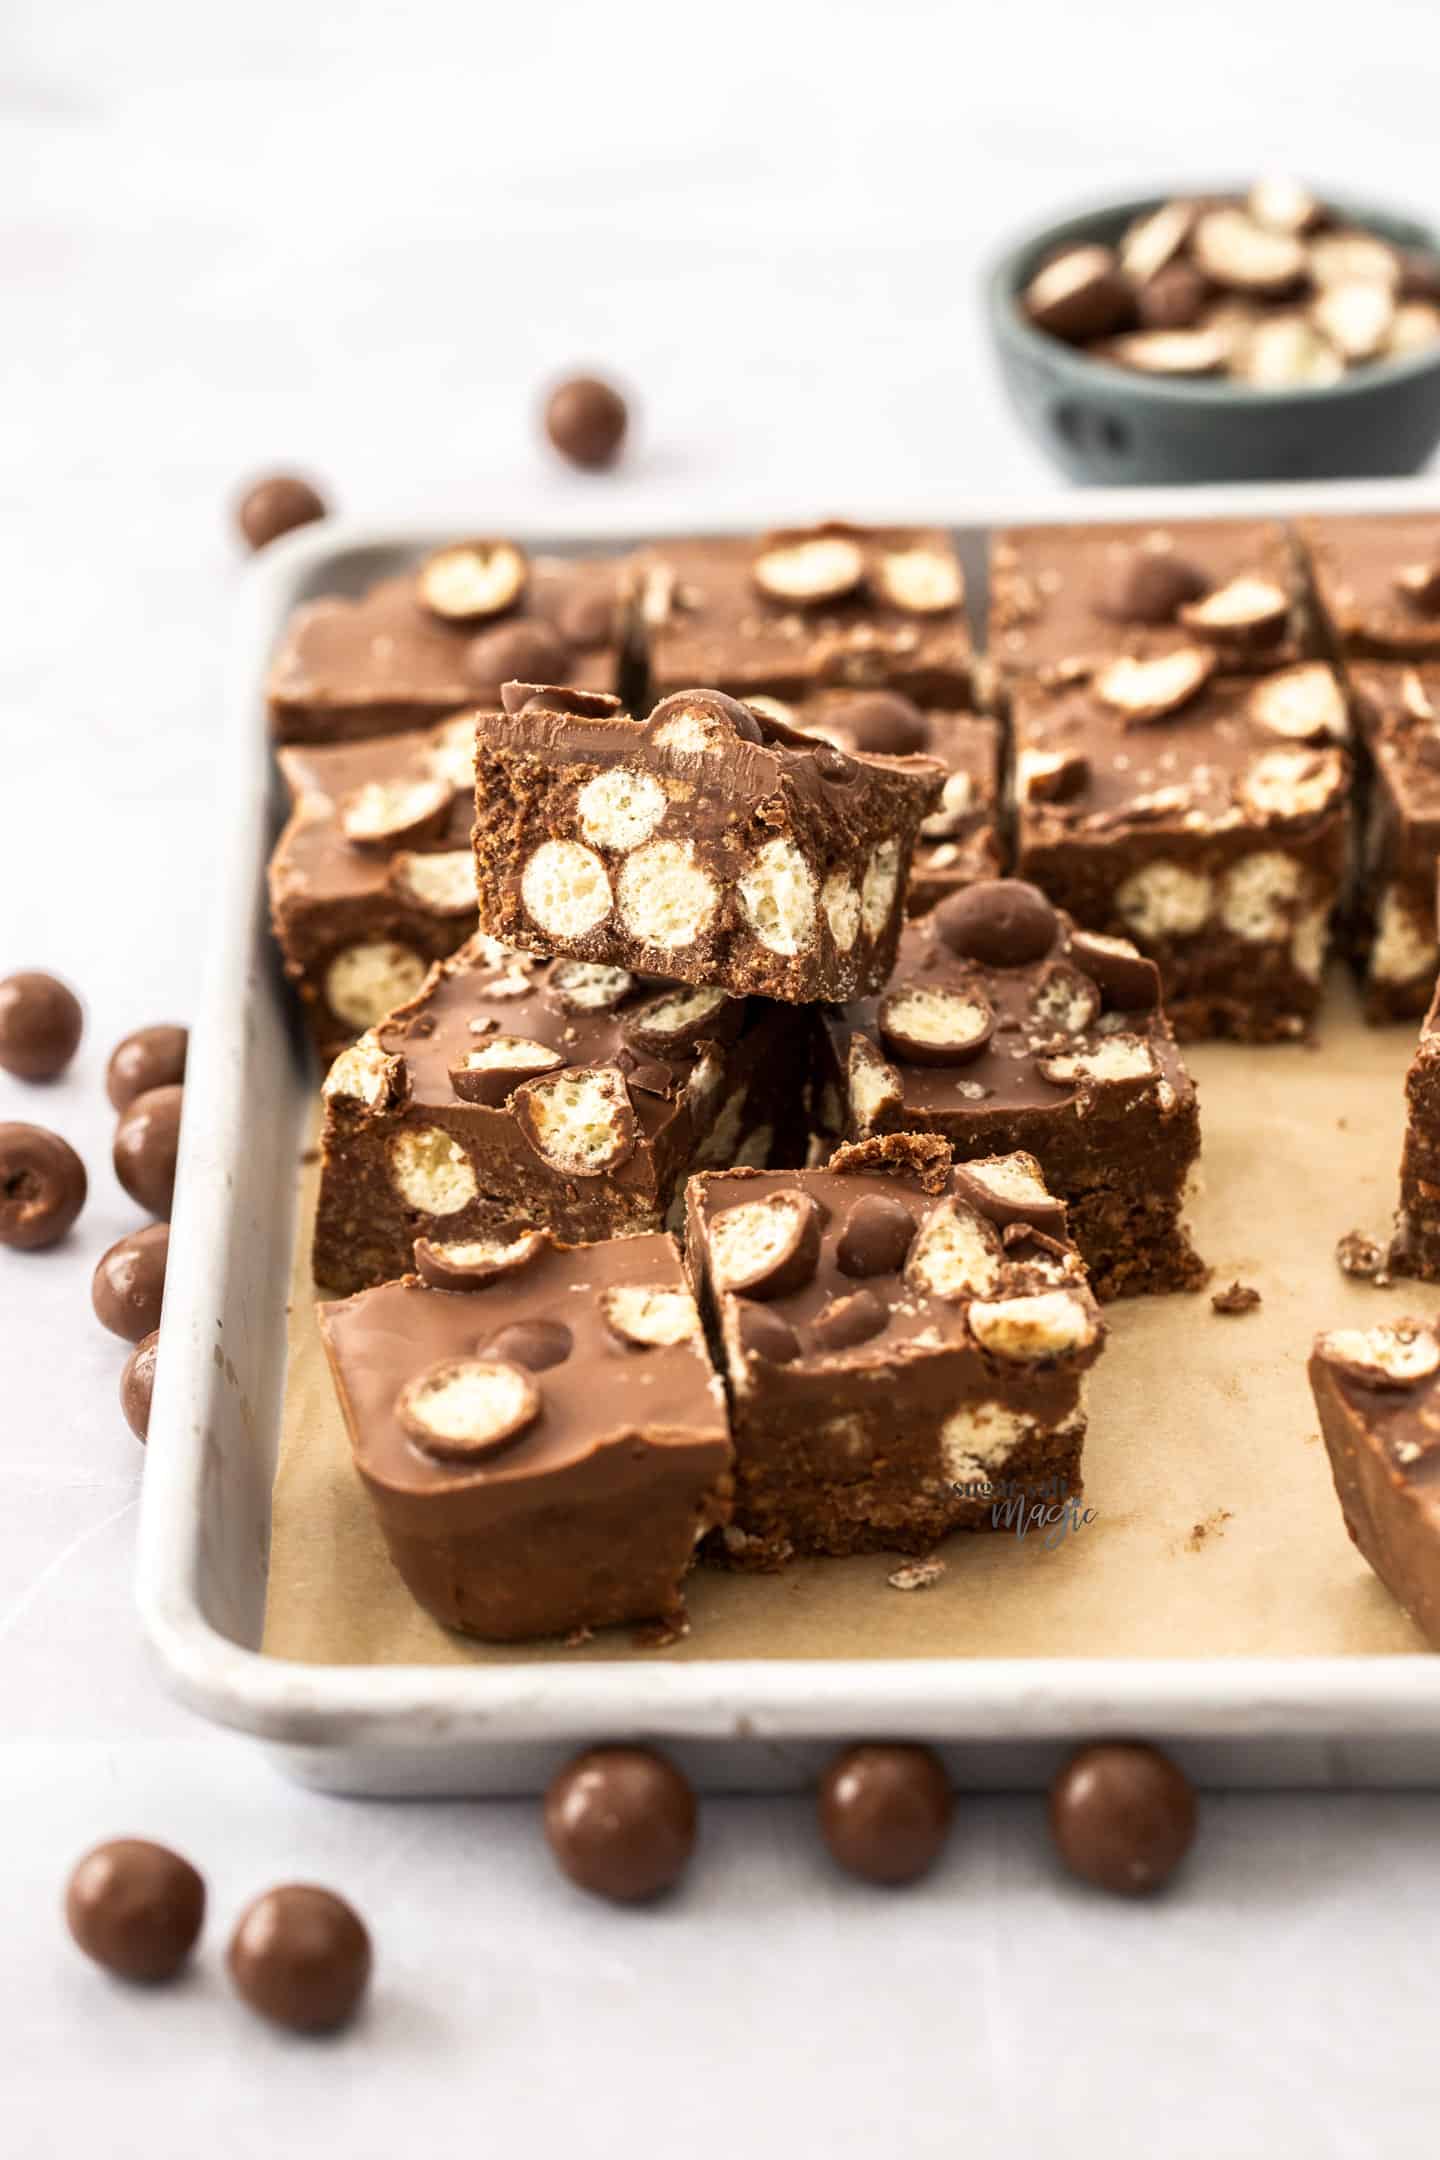 Squares of Maltesers traybake stacked on top of one another showing the side view.